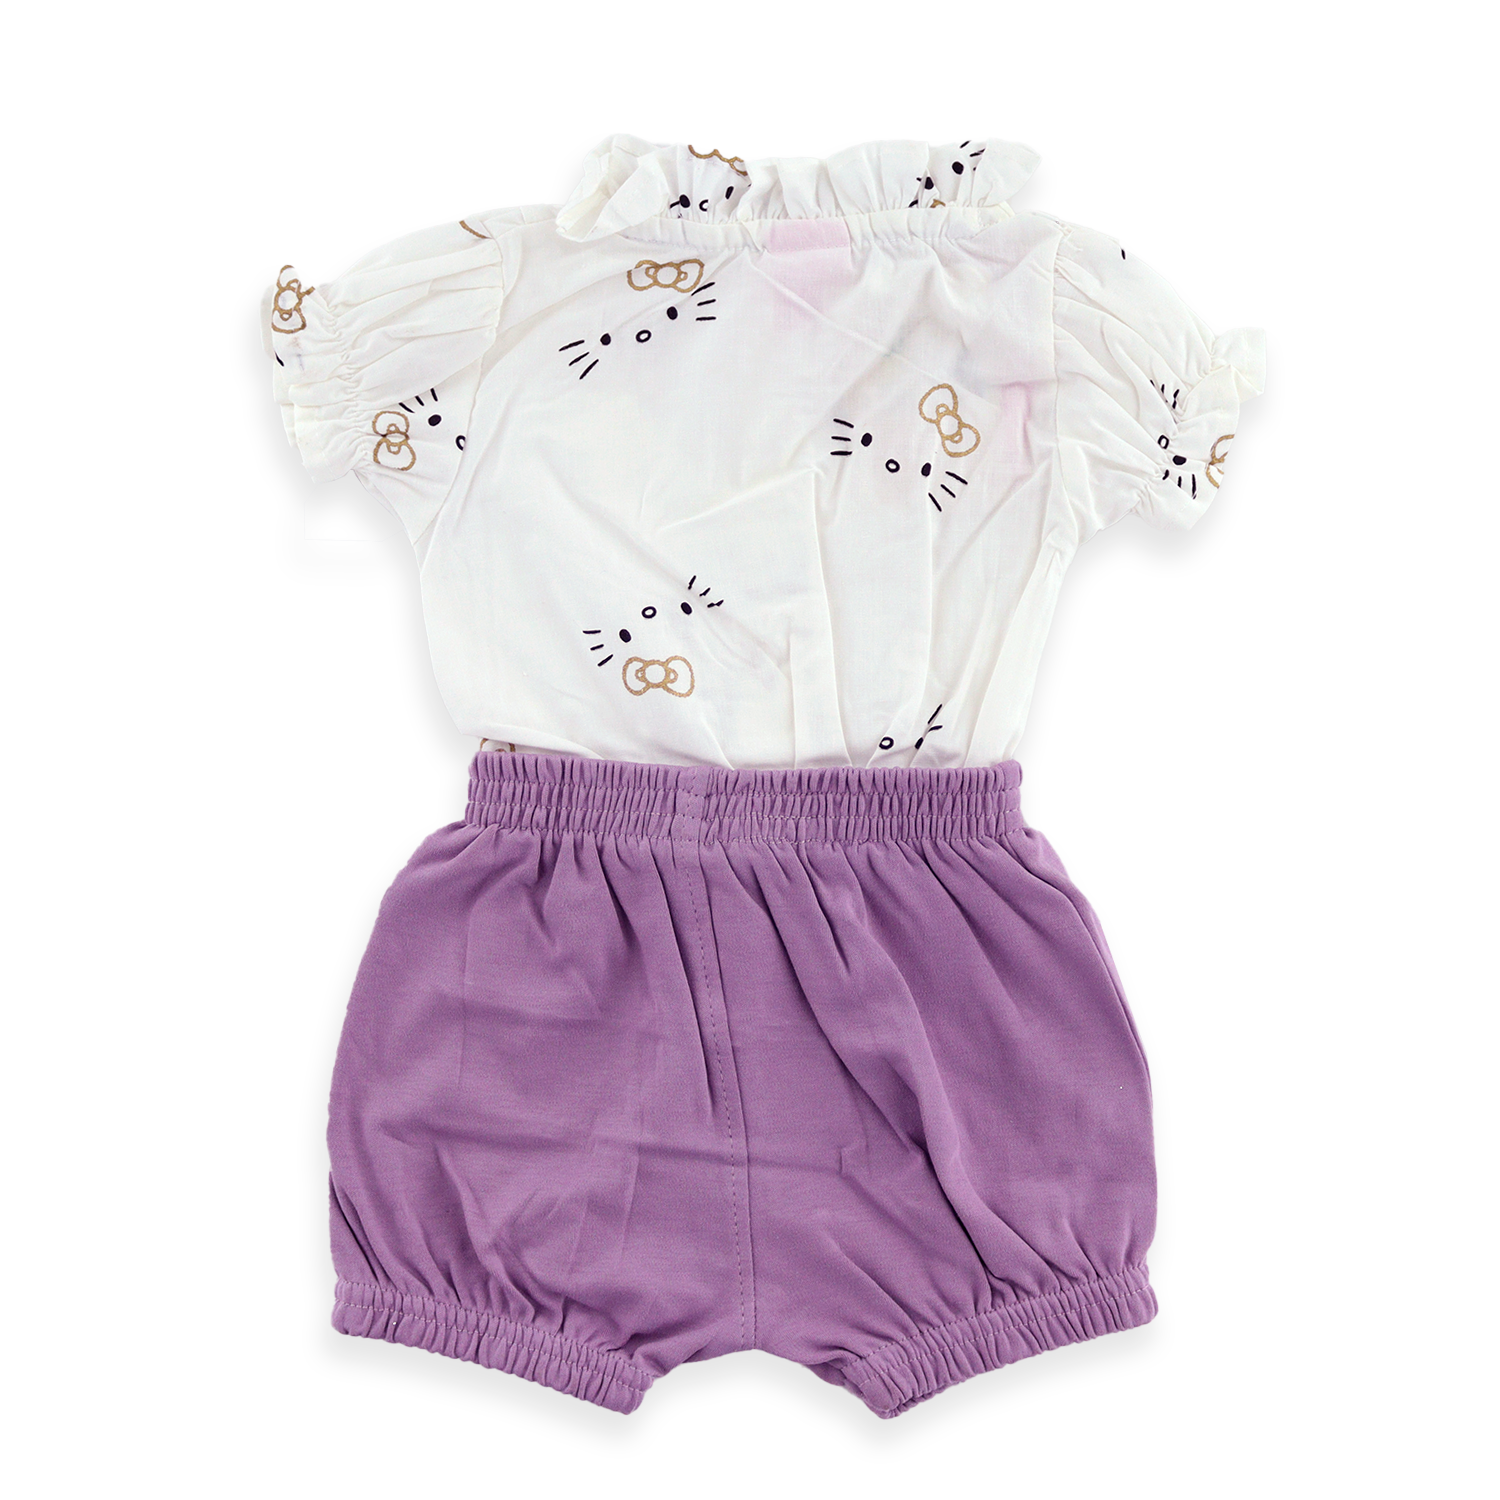 Toddler Baby Girls Floral Short Sleeve Jumpsuit  Summer Outfits with Headband